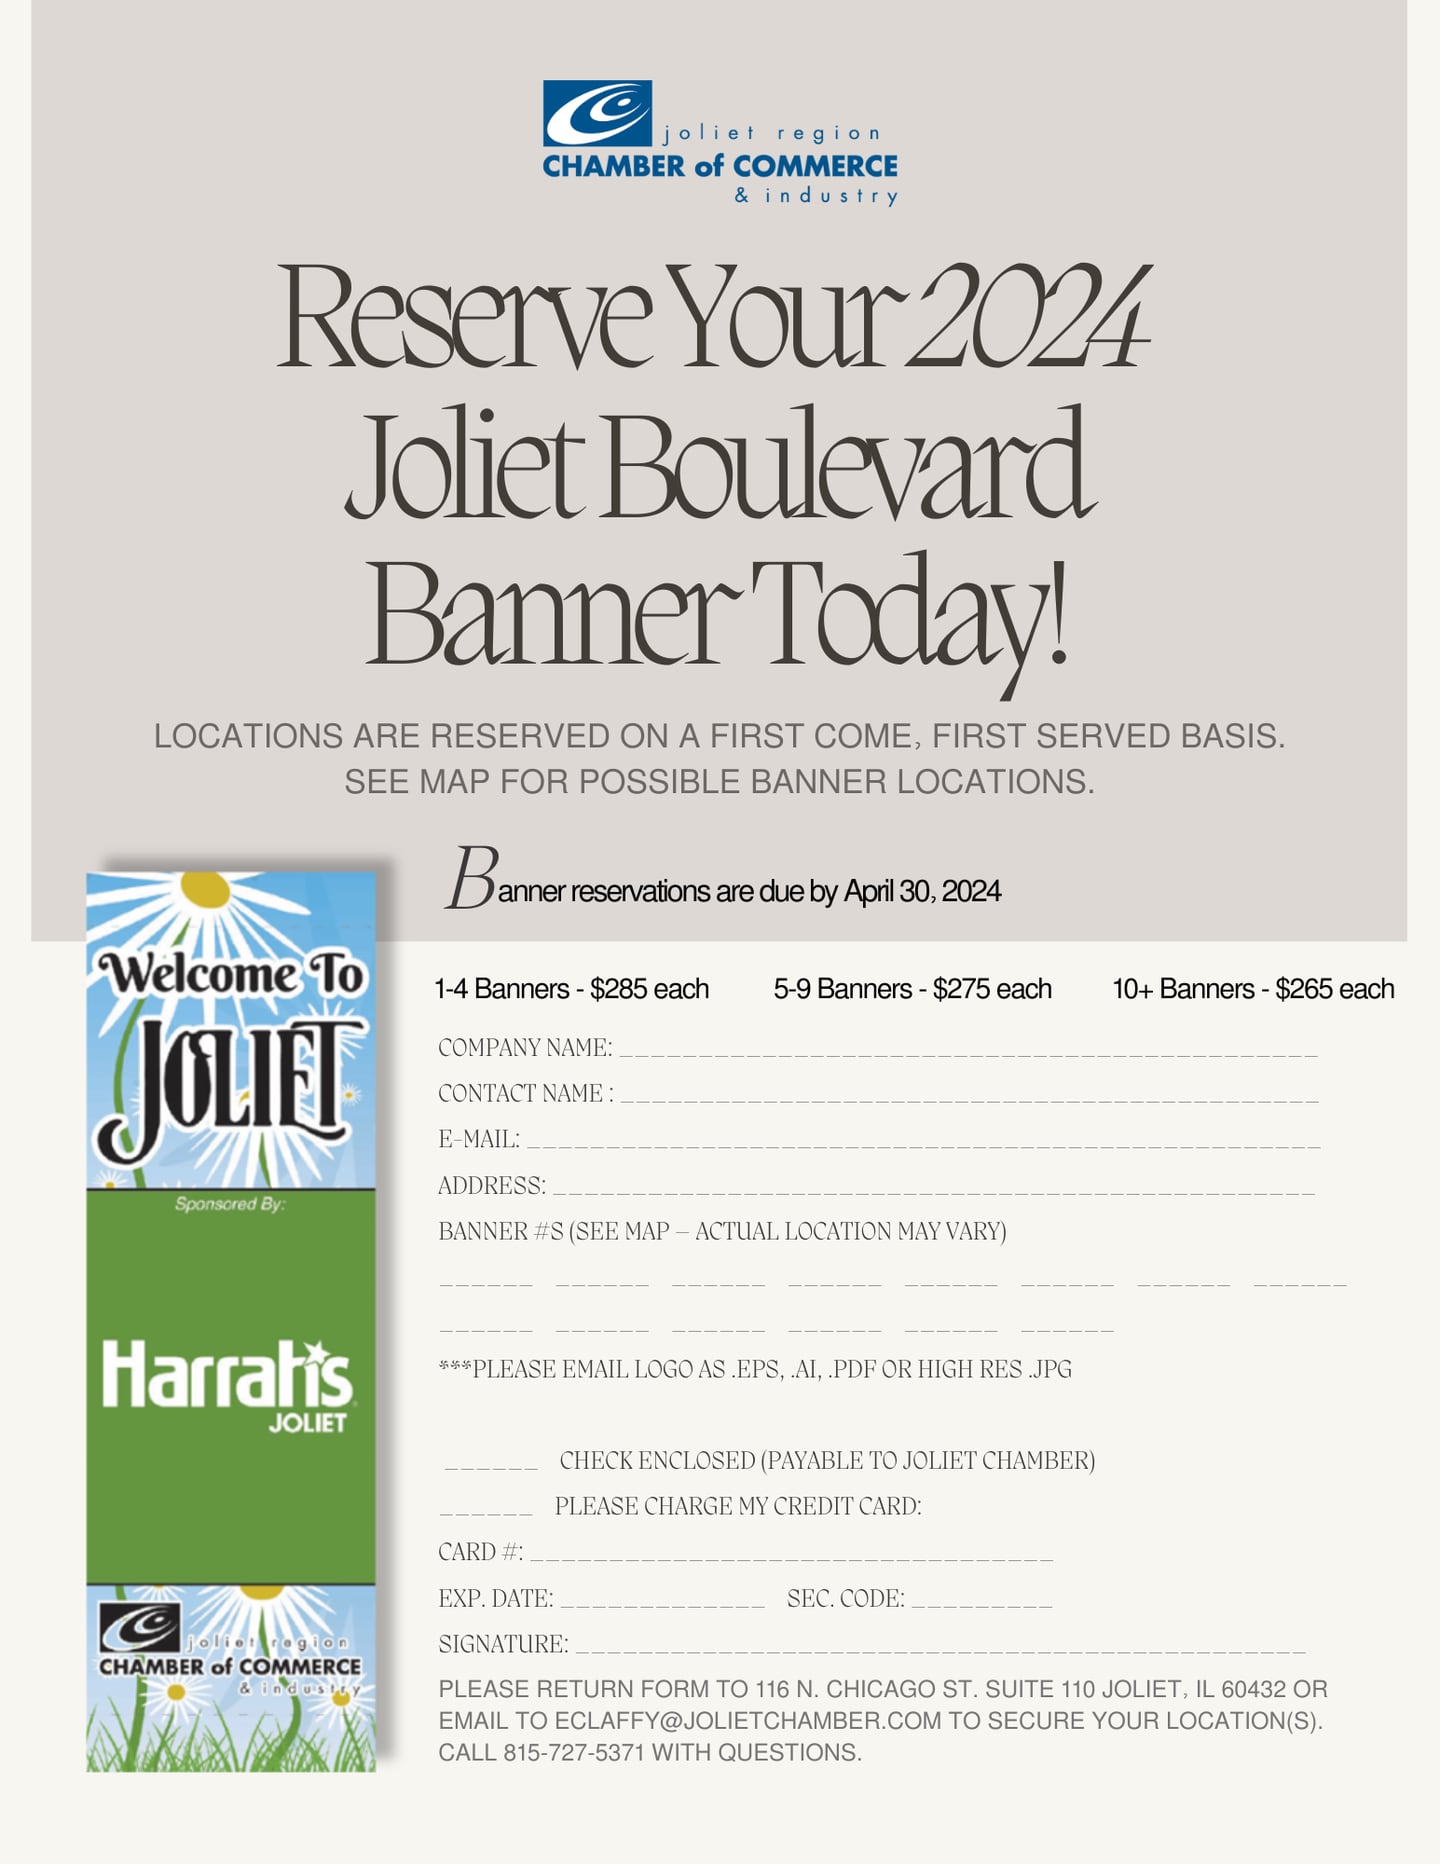 Reservations are available for the 2024 Joliet Boulevard Banner program through the Joliet Chamber of Commerce until April 30, 2024